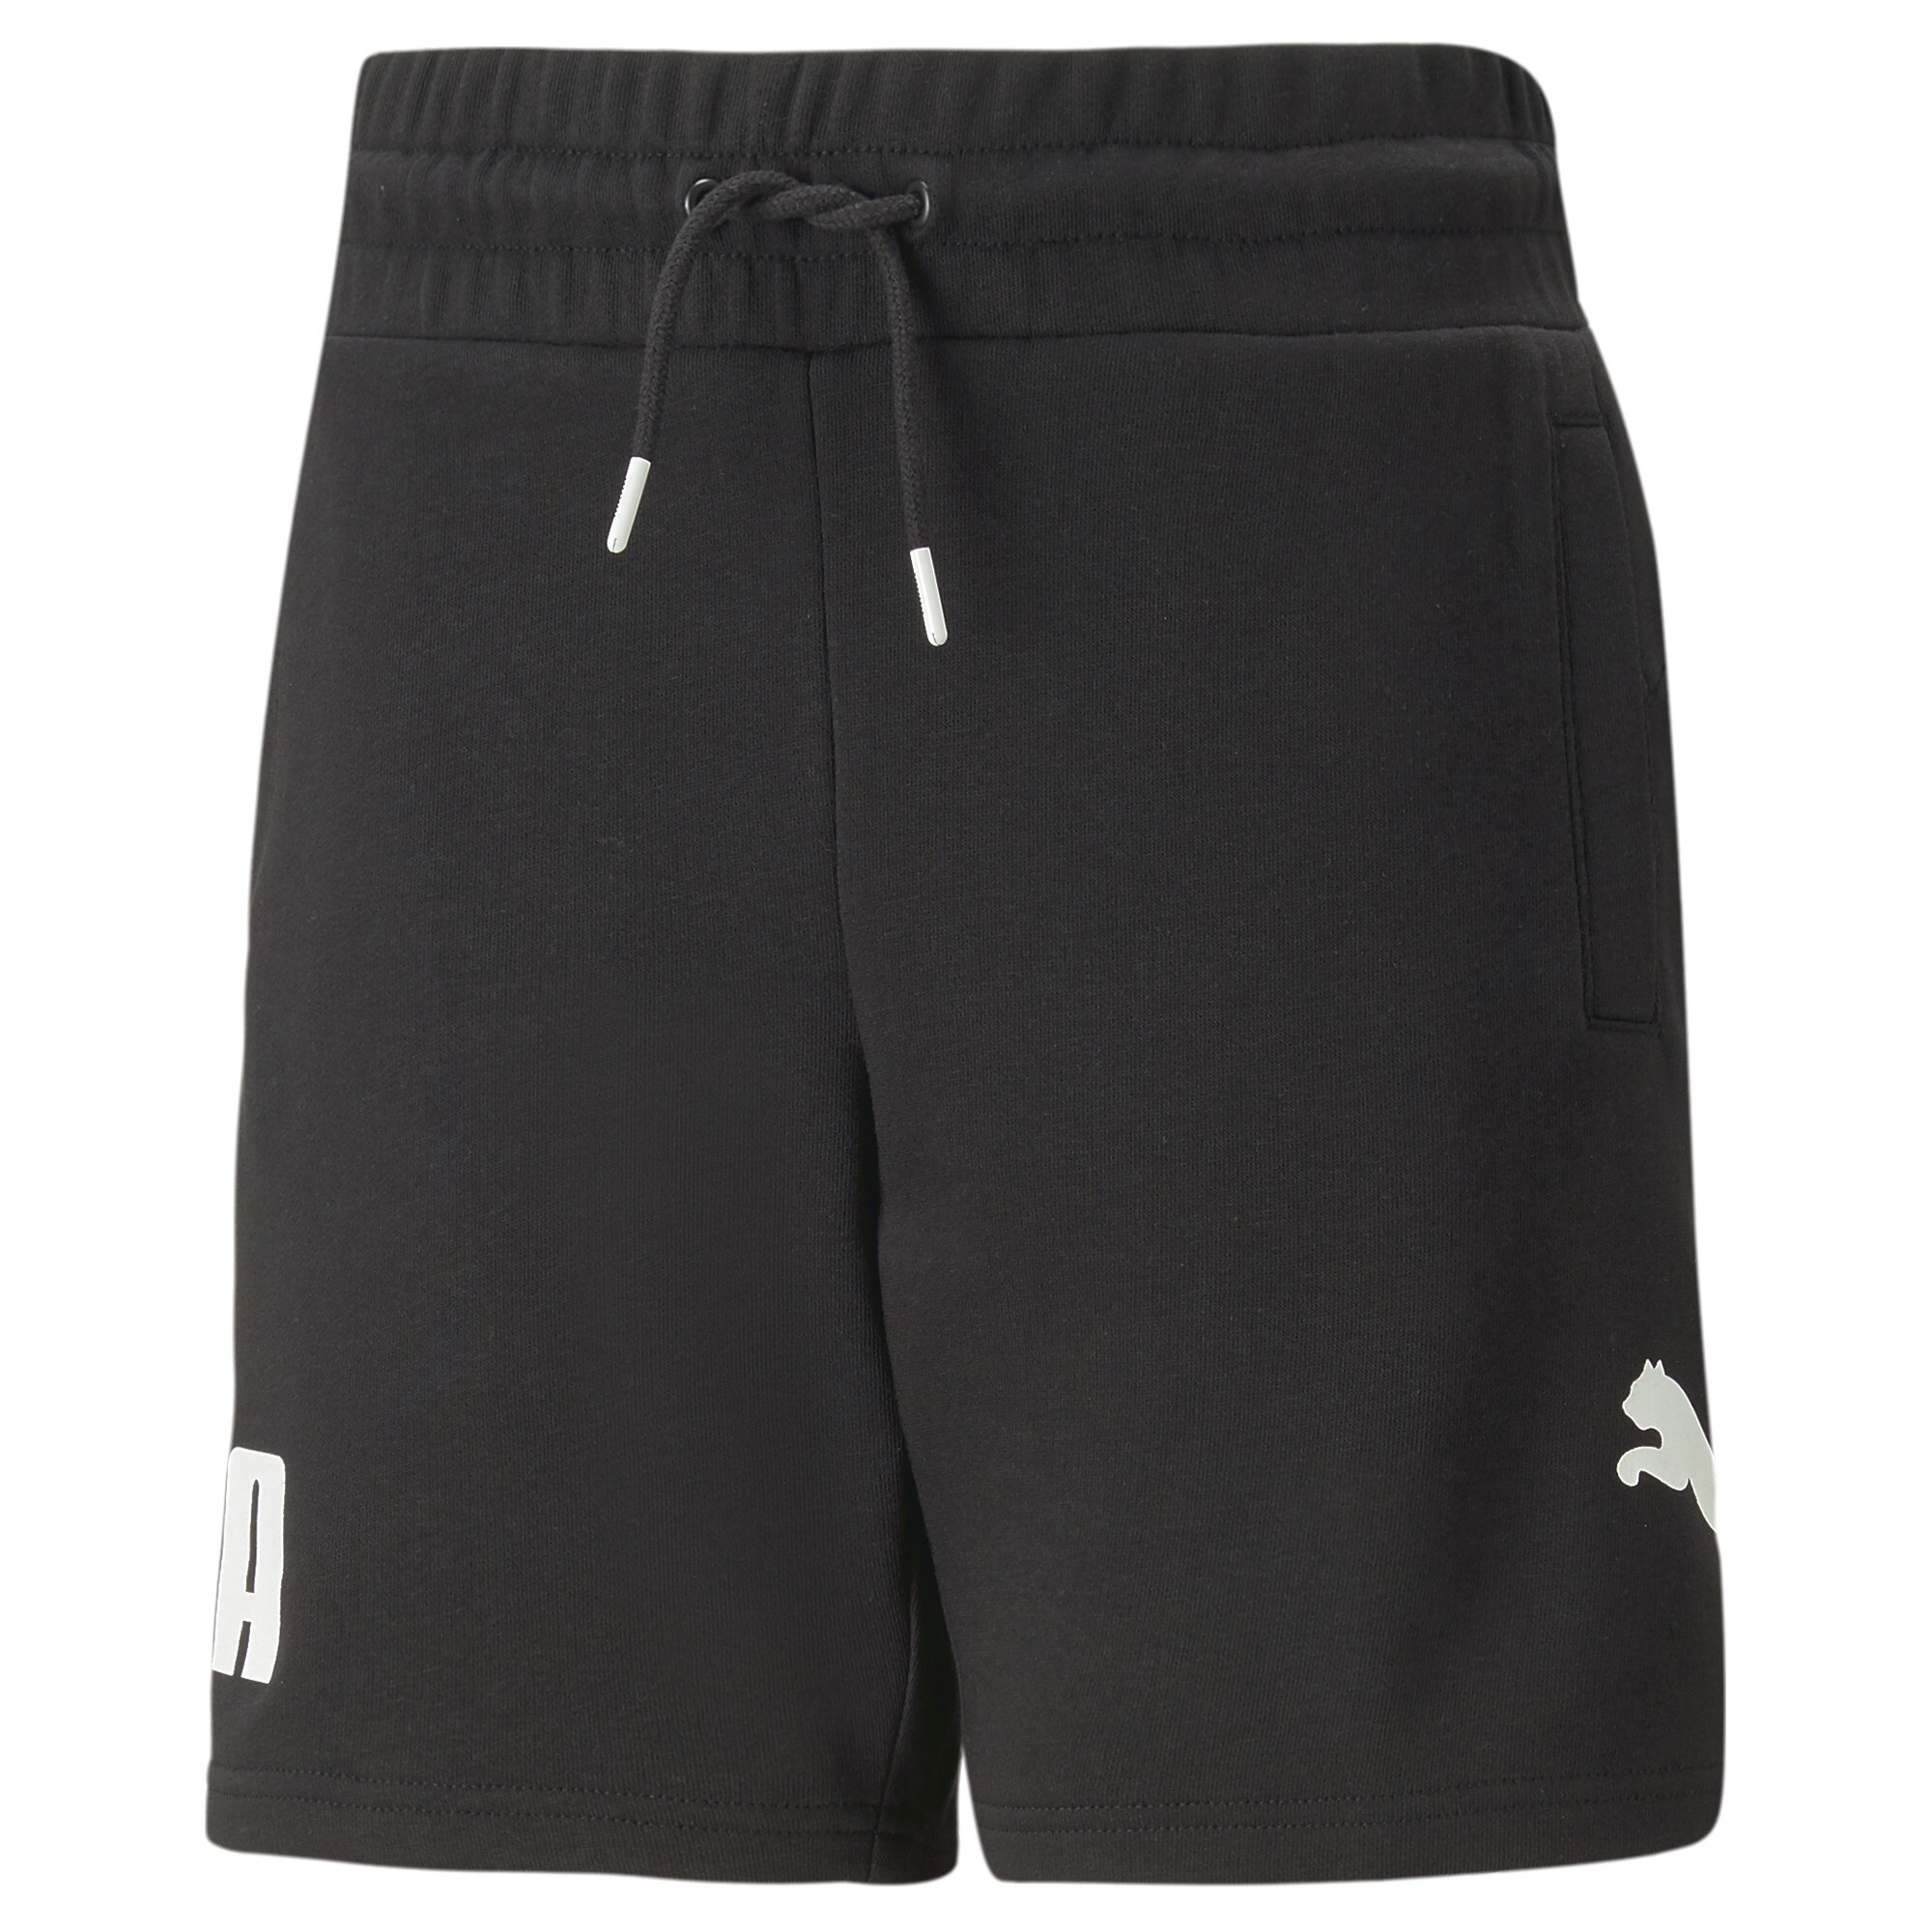 PUMA Power Shorts In Black, Size 4-5 Youth